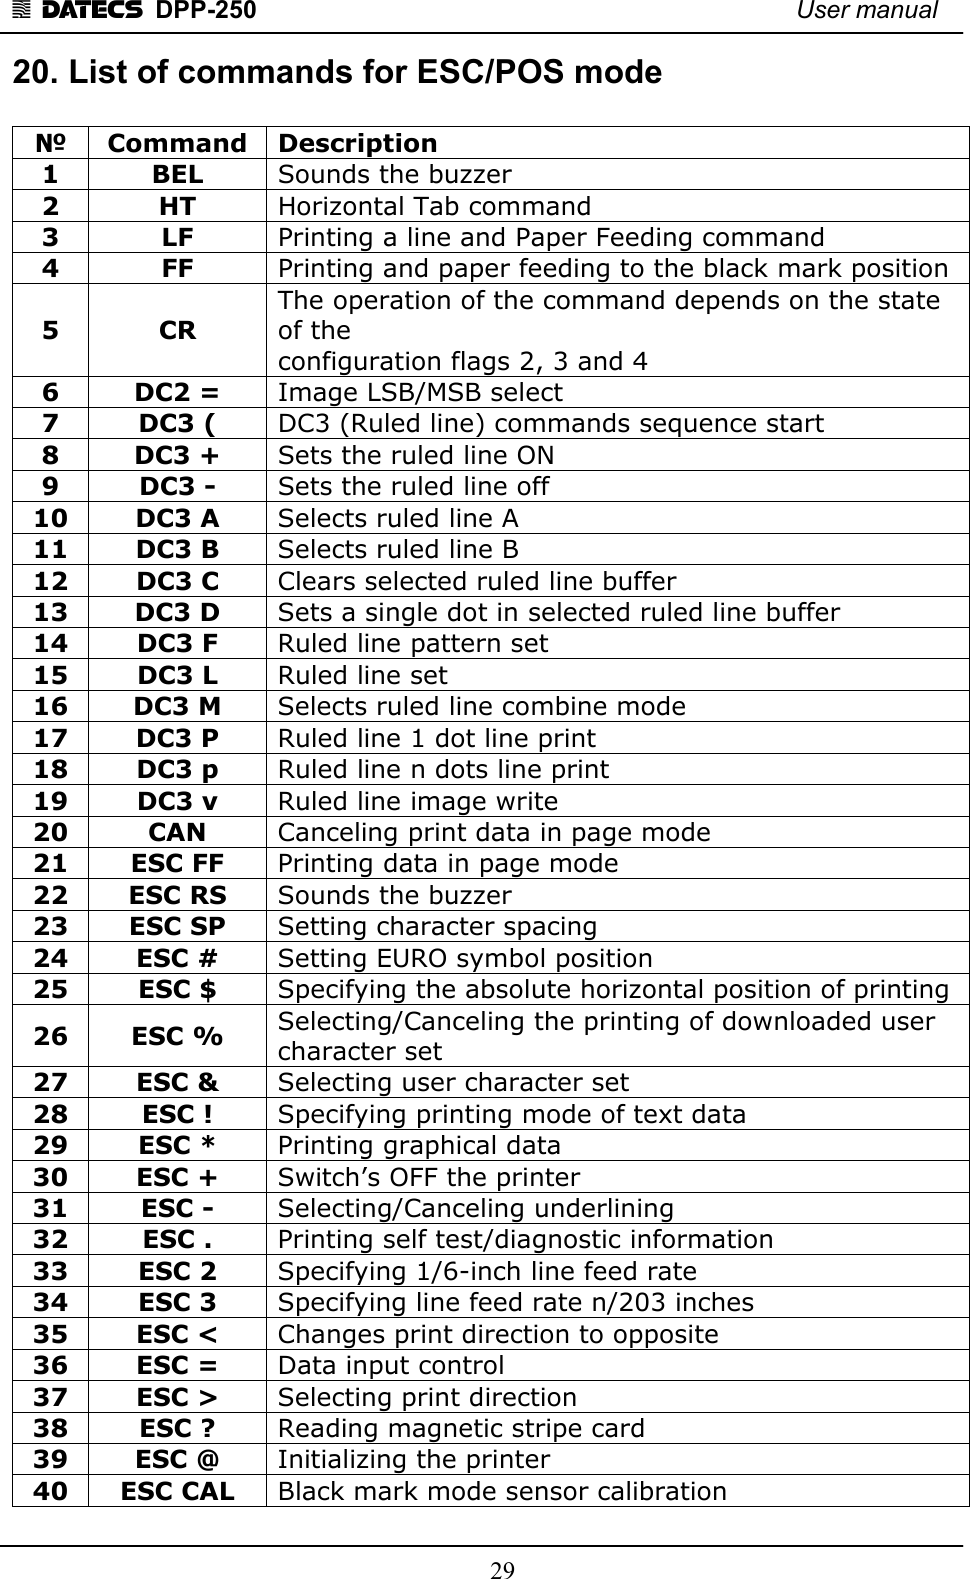 1 DATECS  DPP-250    User manual     29 20. List of commands for ESC/POS mode  №  Command  Description 1  BEL  Sounds the buzzer 2  HT  Horizontal Tab command 3  LF  Printing а line and Paper Feeding command 4  FF  Printing and paper feeding to the black mark position 5  CR The operation of the command depends on the state of the configuration flags 2, 3 and 4 6  DC2 =  Image LSB/MSB select 7  DC3 (  DC3 (Ruled line) commands sequence start 8  DC3 +  Sets the ruled line ON 9  DC3 -  Sets the ruled line off 10  DC3 A  Selects ruled line A 11  DC3 B  Selects ruled line B 12  DC3 C  Clears selected ruled line buffer 13  DC3 D  Sets a single dot in selected ruled line buffer 14  DC3 F  Ruled line pattern set 15  DC3 L  Ruled line set 16  DC3 M  Selects ruled line combine mode 17  DC3 P  Ruled line 1 dot line print 18  DC3 p  Ruled line n dots line print 19  DC3 v  Ruled line image write 20  CAN  Canceling print data in page mode 21  ESC FF  Printing data in page mode 22  ESC RS  Sounds the buzzer 23  ESC SP  Setting character spacing 24  ESC #  Setting EURO symbol position 25  ESC $  Specifying the absolute horizontal position of printing 26  ESC %  Selecting/Canceling the printing of downloaded user character set 27  ESC &amp;  Selecting user character set   28  ESC !  Specifying printing mode of text data  29  ESC *  Printing graphical data 30  ESC +  Switch’s OFF the printer 31  ESC -  Selecting/Canceling underlining 32  ESC .  Printing self test/diagnostic information   33  ESC 2  Specifying 1/6-inch line feed rate   34  ESC 3  Specifying line feed rate n/203 inches   35  ESC &lt;  Changes print direction to opposite 36  ESC =  Data input control   37  ESC &gt;  Selecting print direction 38  ESC ?  Reading magnetic stripe card   39  ESC @  Initializing the printer   40  ESC CAL  Black mark mode sensor calibration 